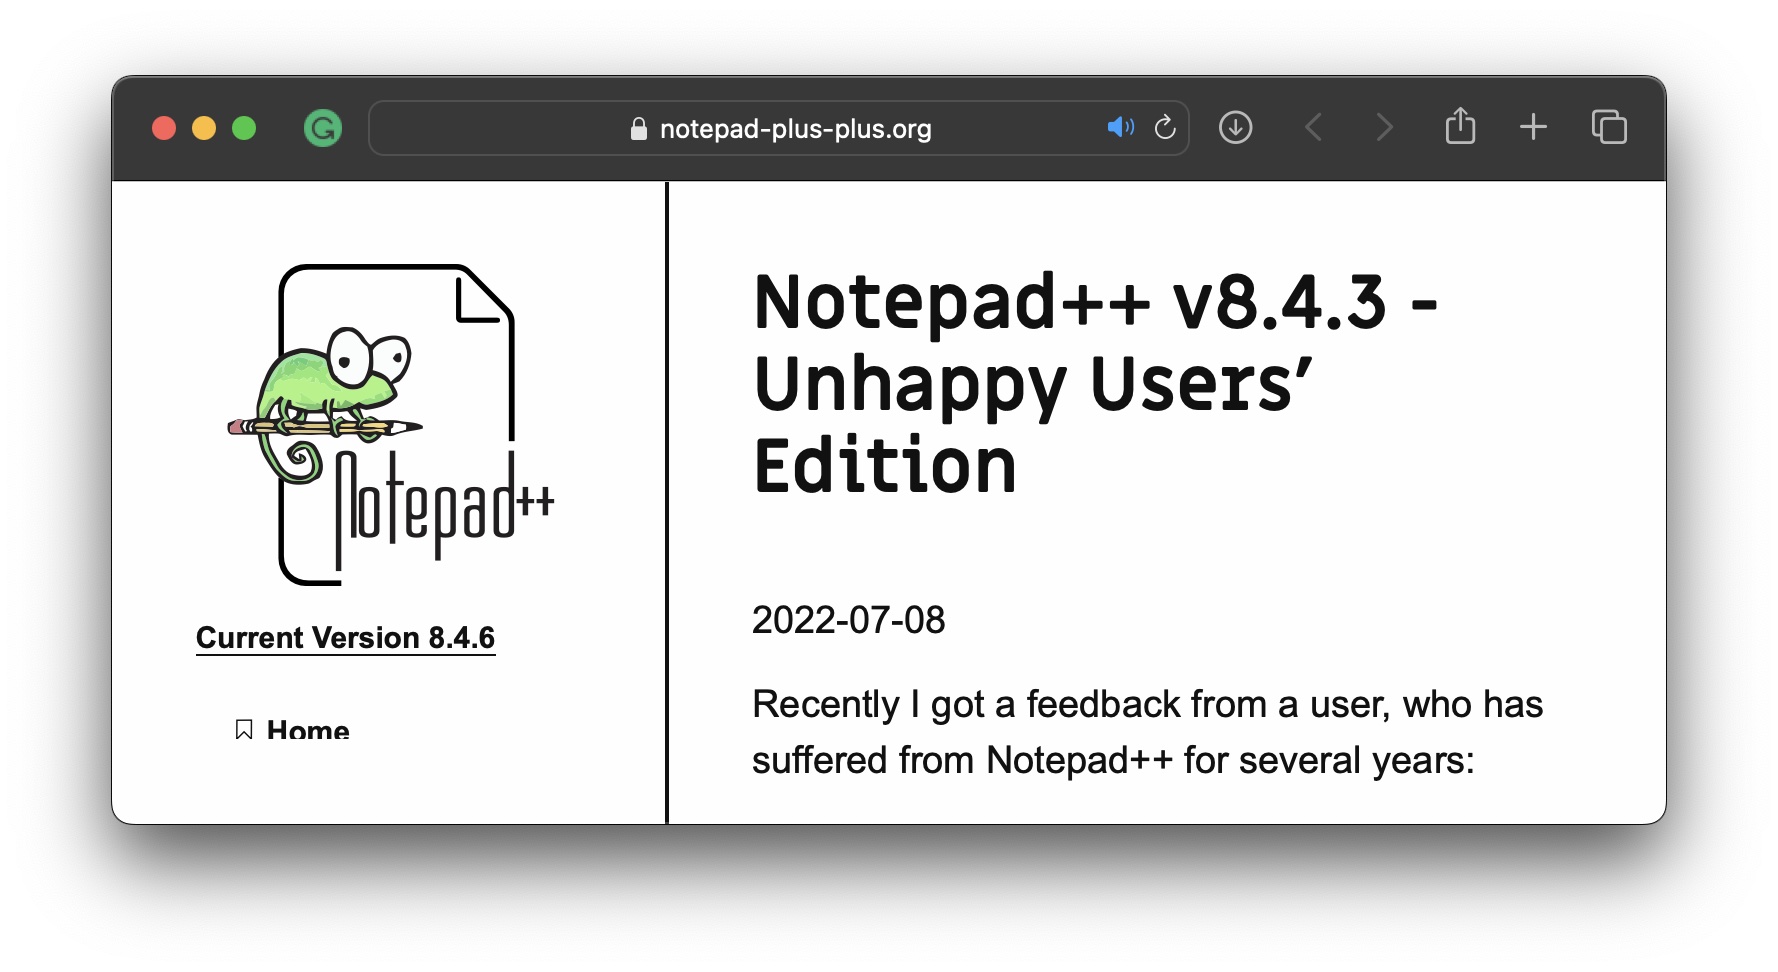 Notepad++ Unhappy Users Version